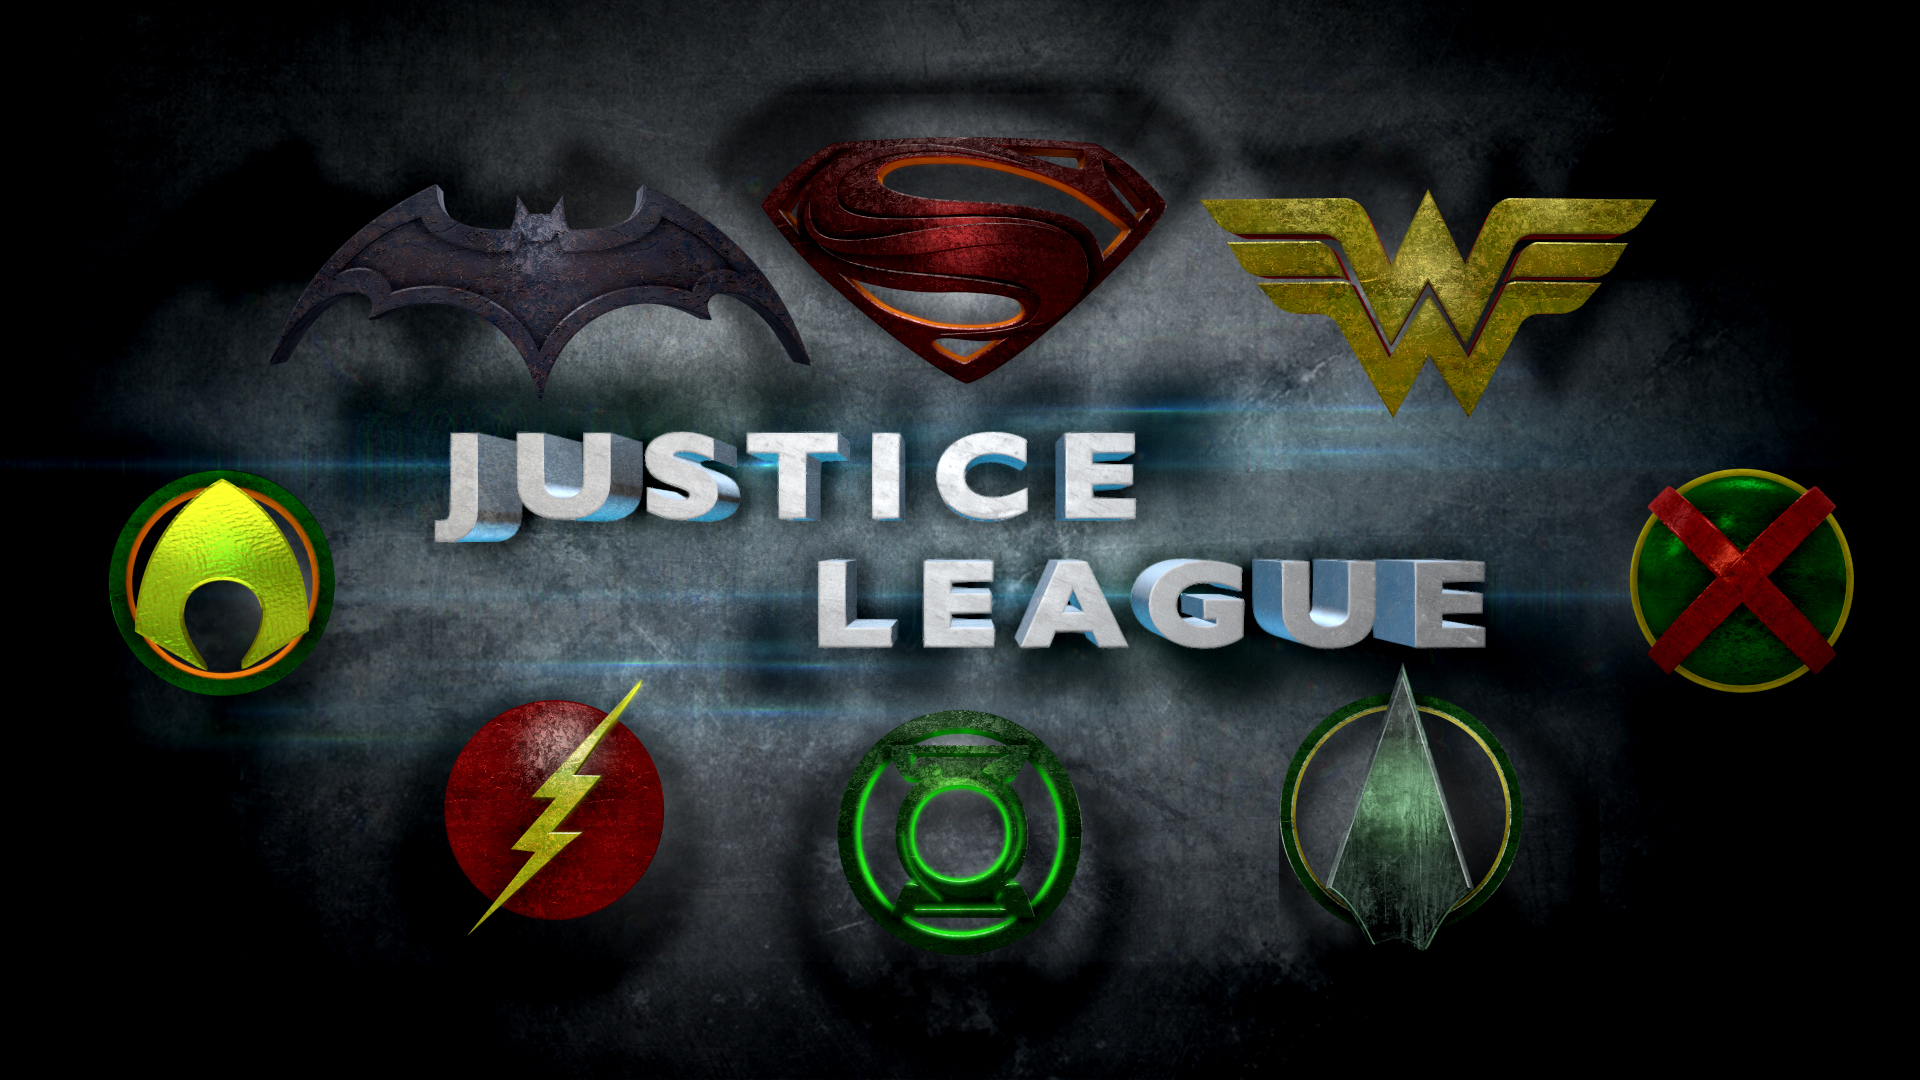 This Justice League Collage